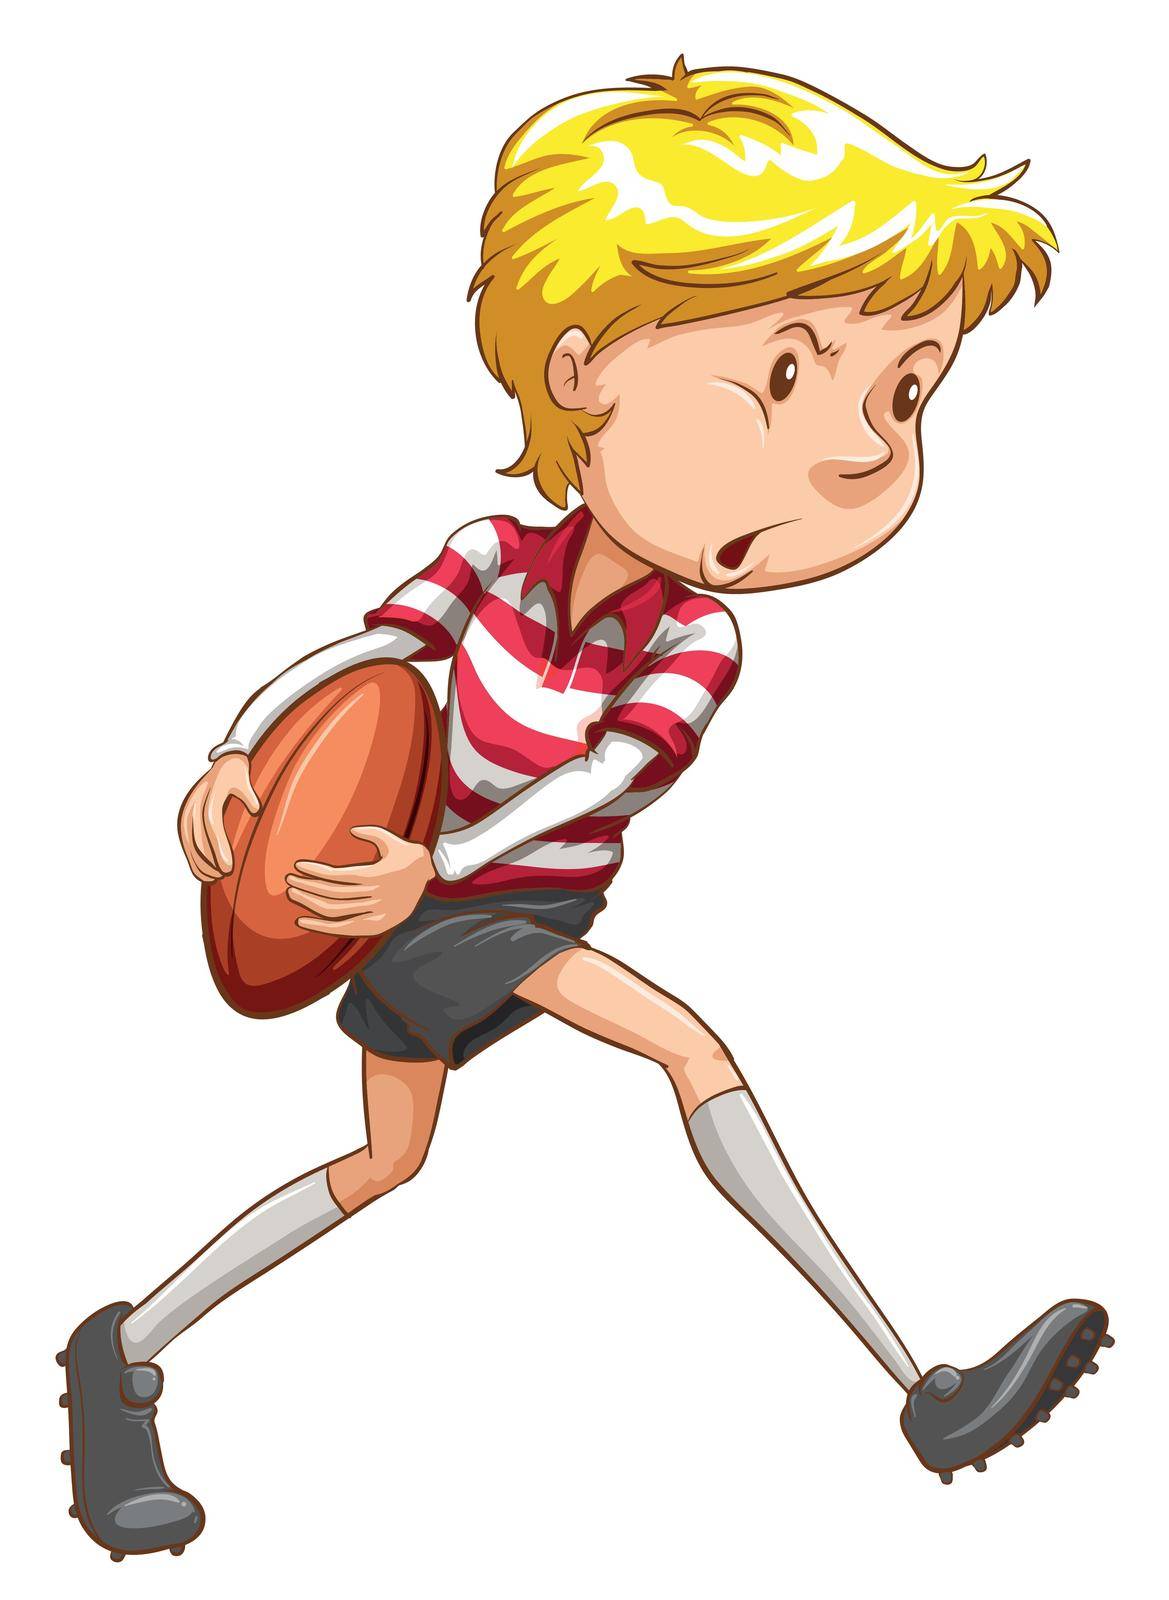 Illustration of a simple sketch of a rugby player on a white background